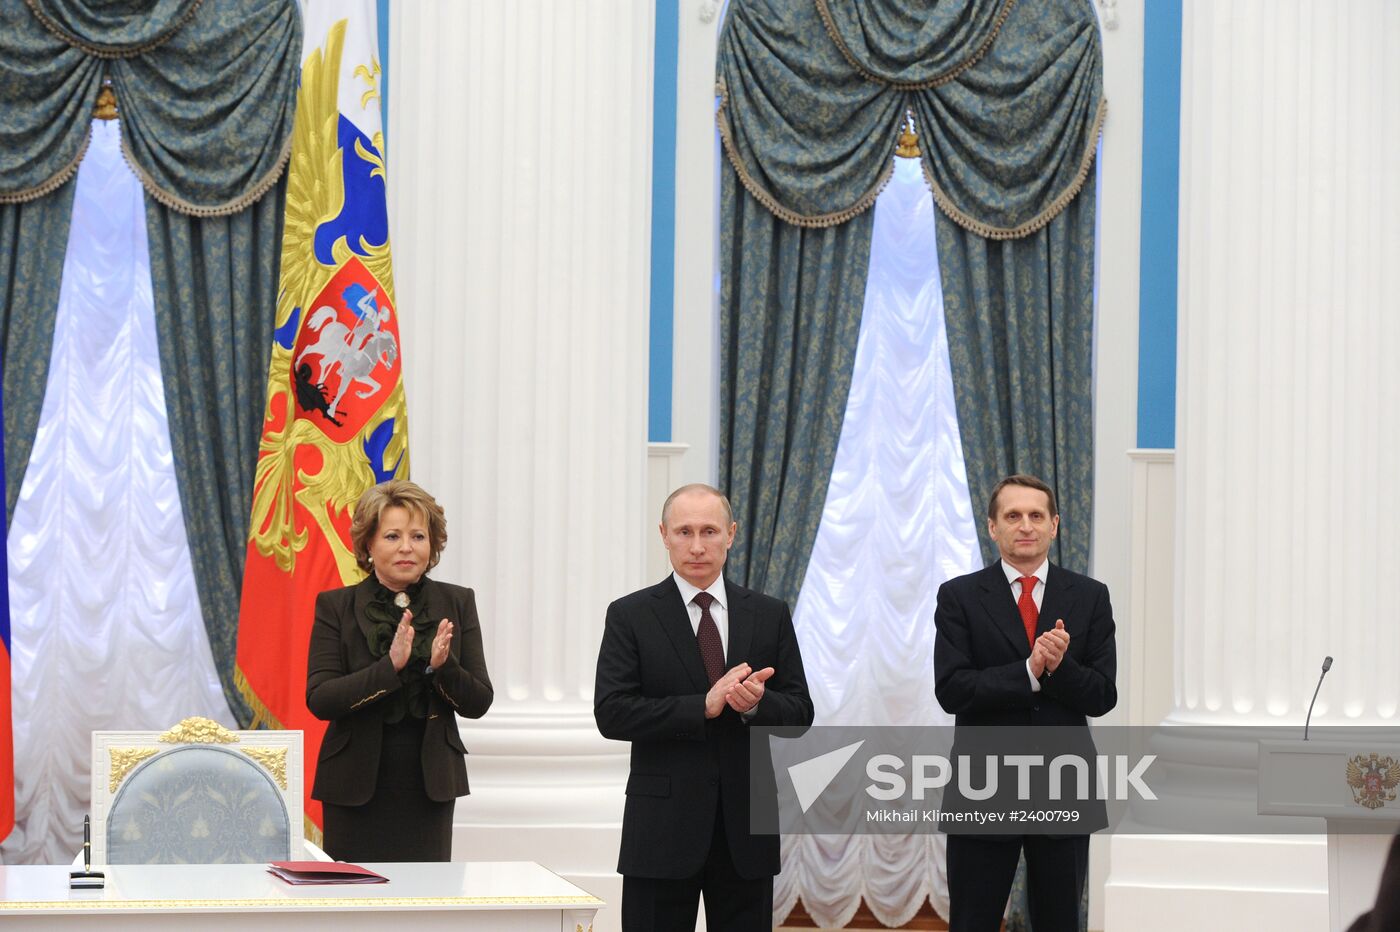 Putin signs decree on formation of Crimean Federal District of the Russian Federation